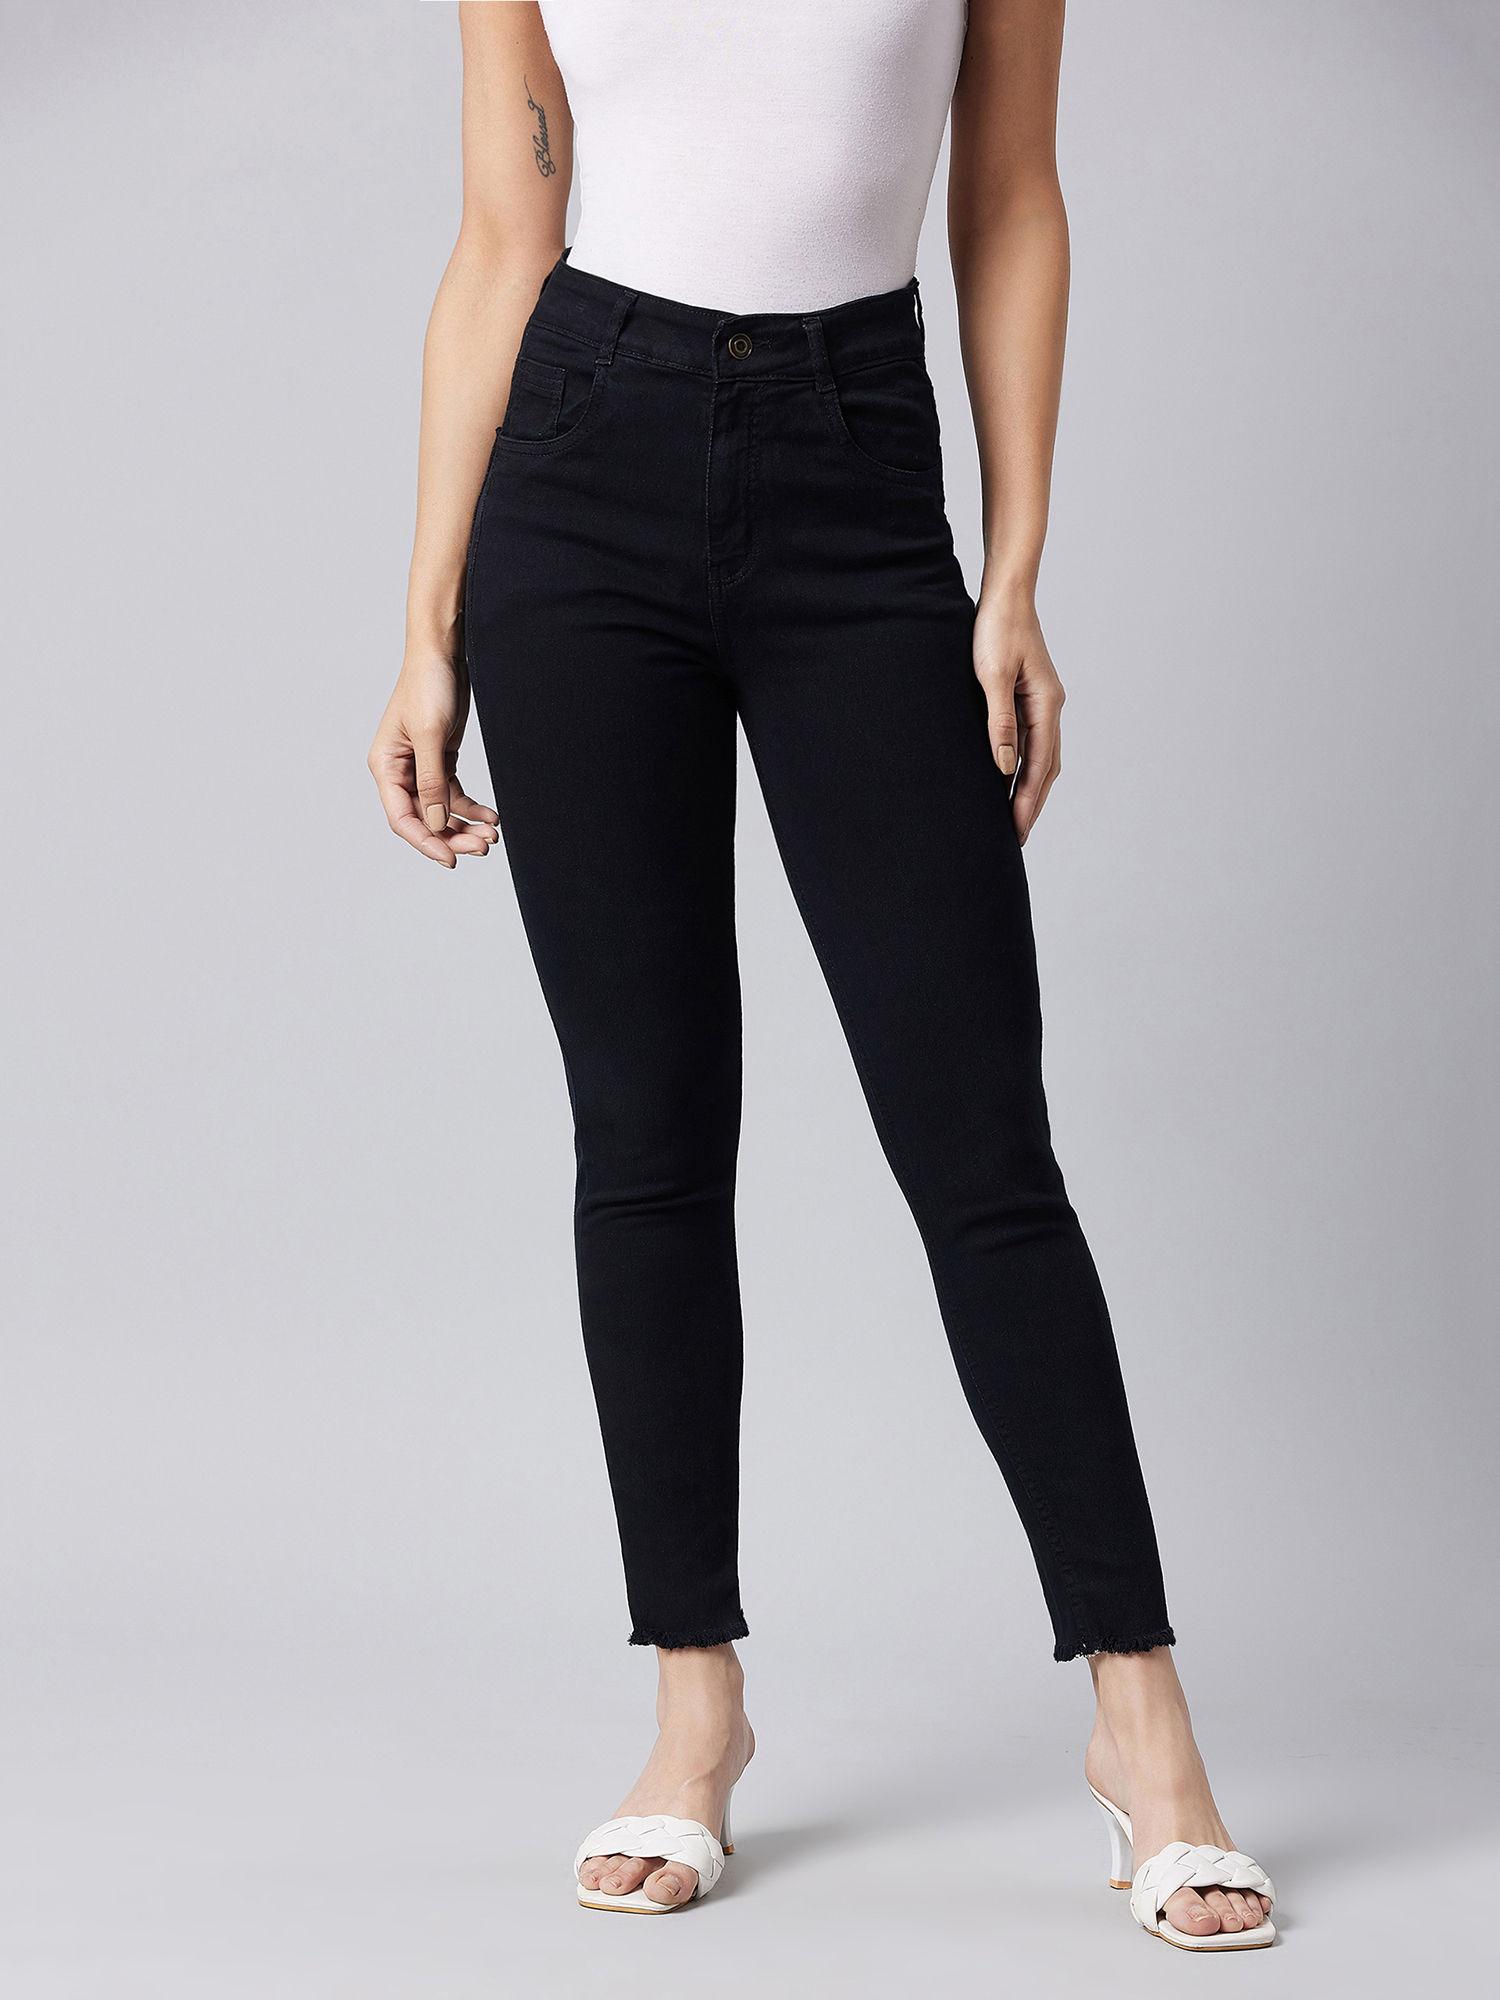 womens-black-skinny-high-rise-clean-look-cropped-stretchable-denim-jeans